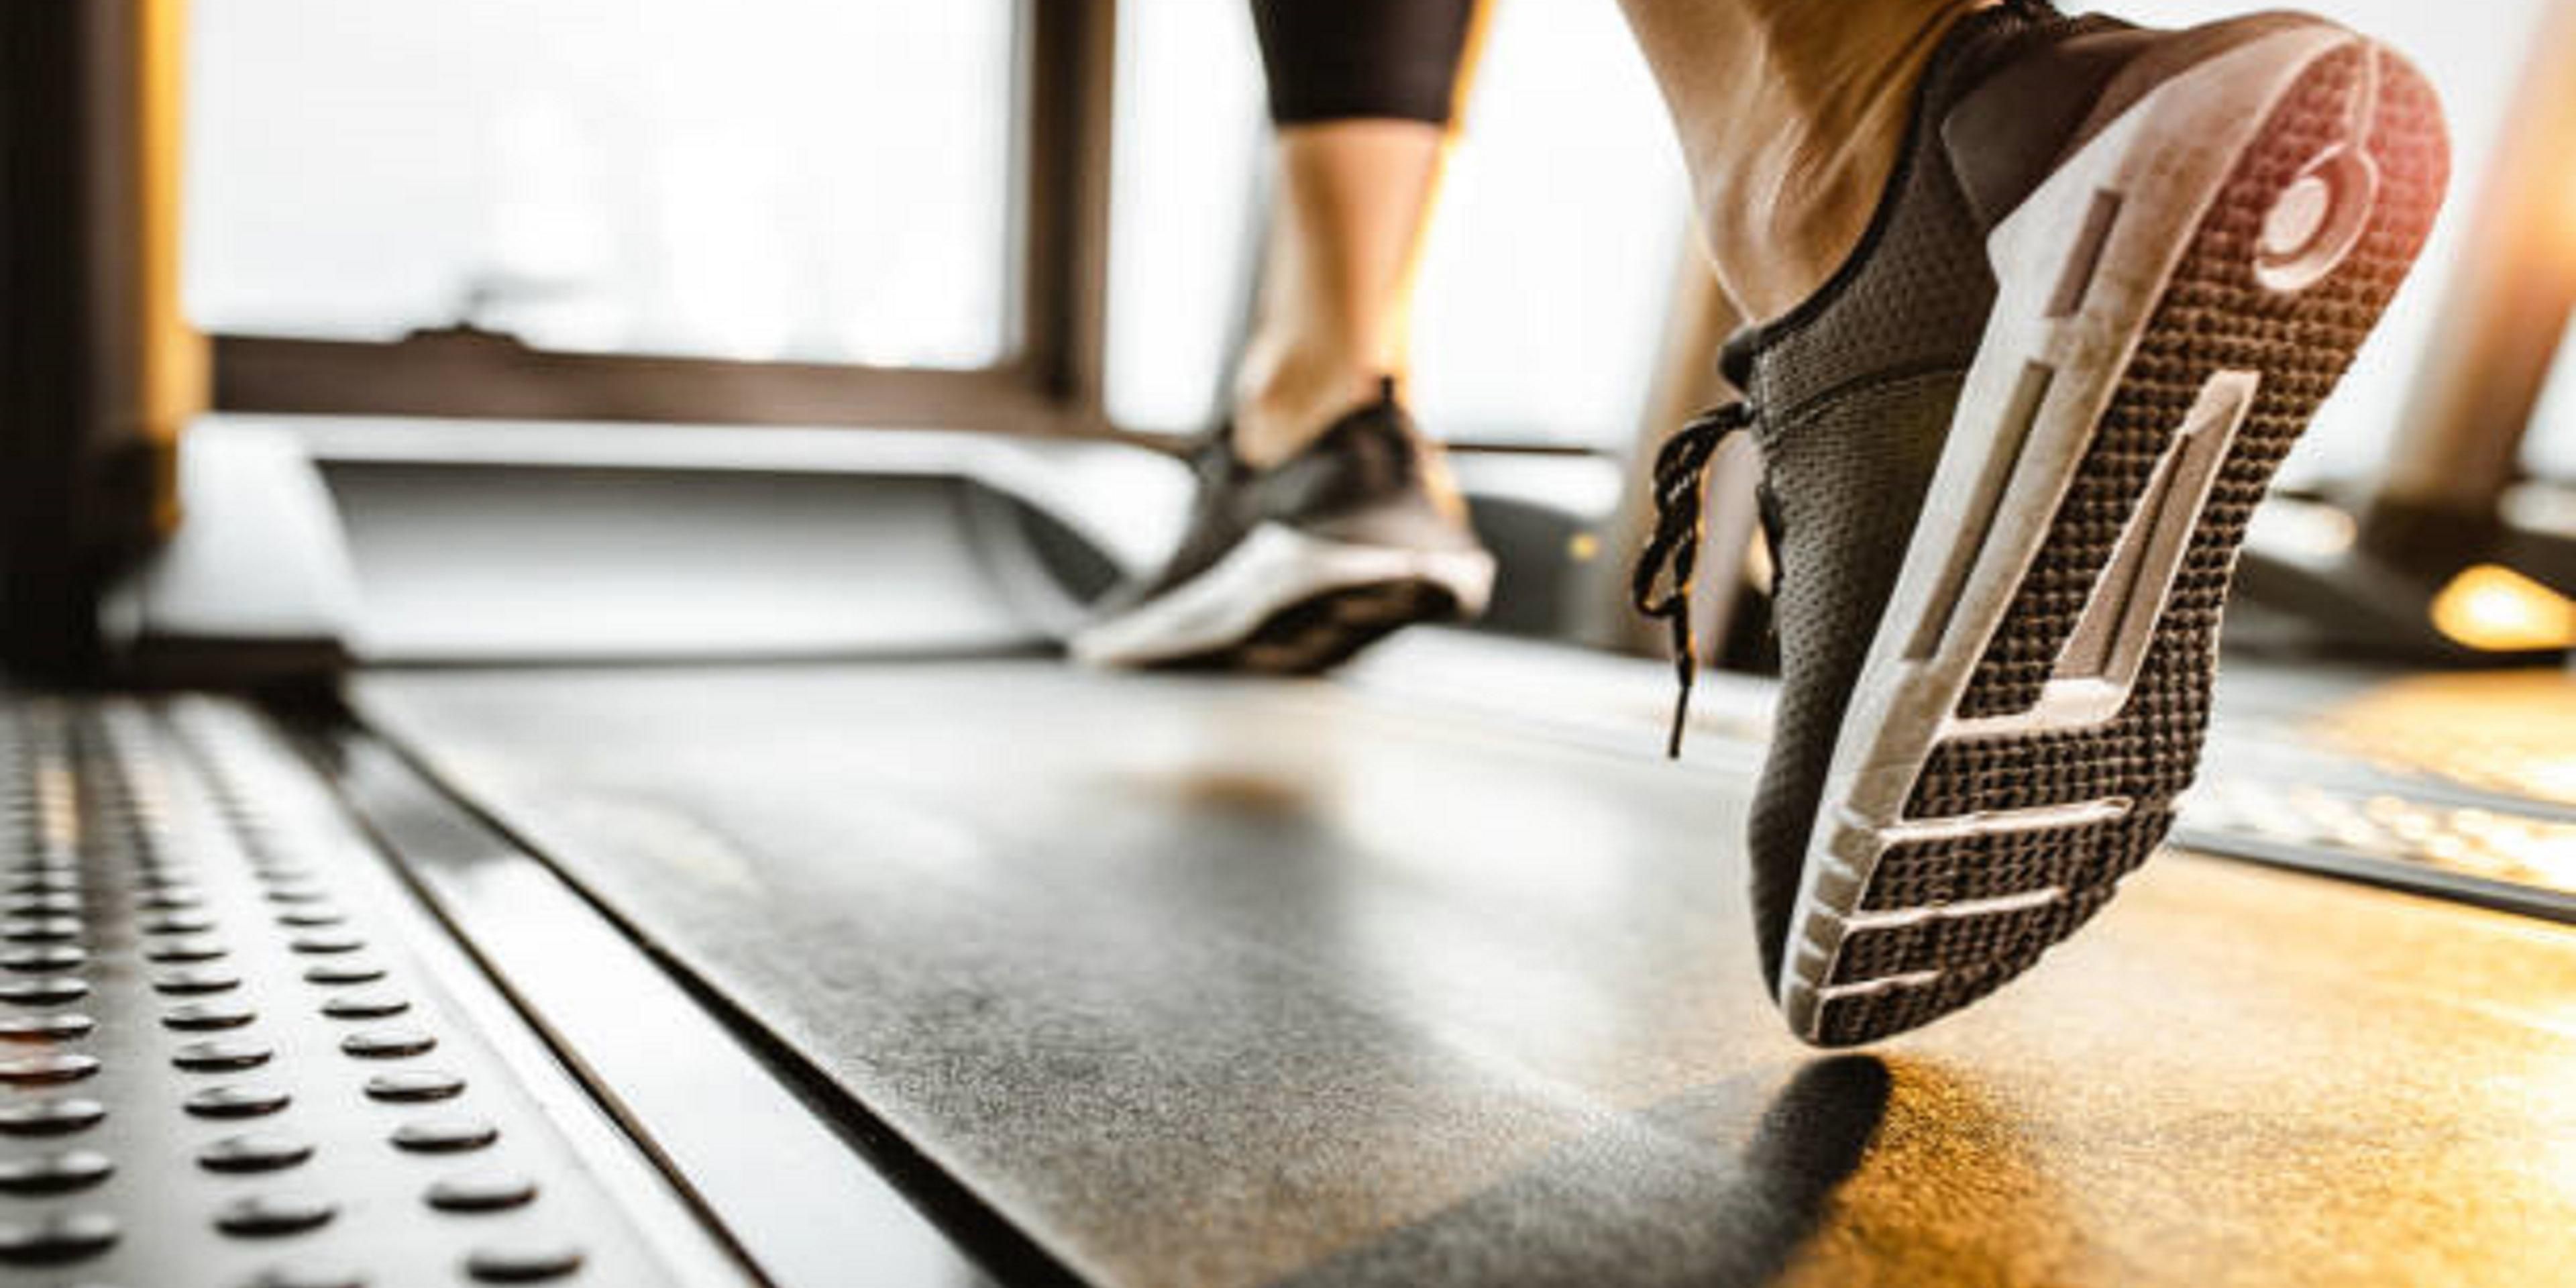 Get your sweat on in our complimentary, fully equipped fitness center with a treadmill, elliptical trainer, and stationary bike, open 24 hours .